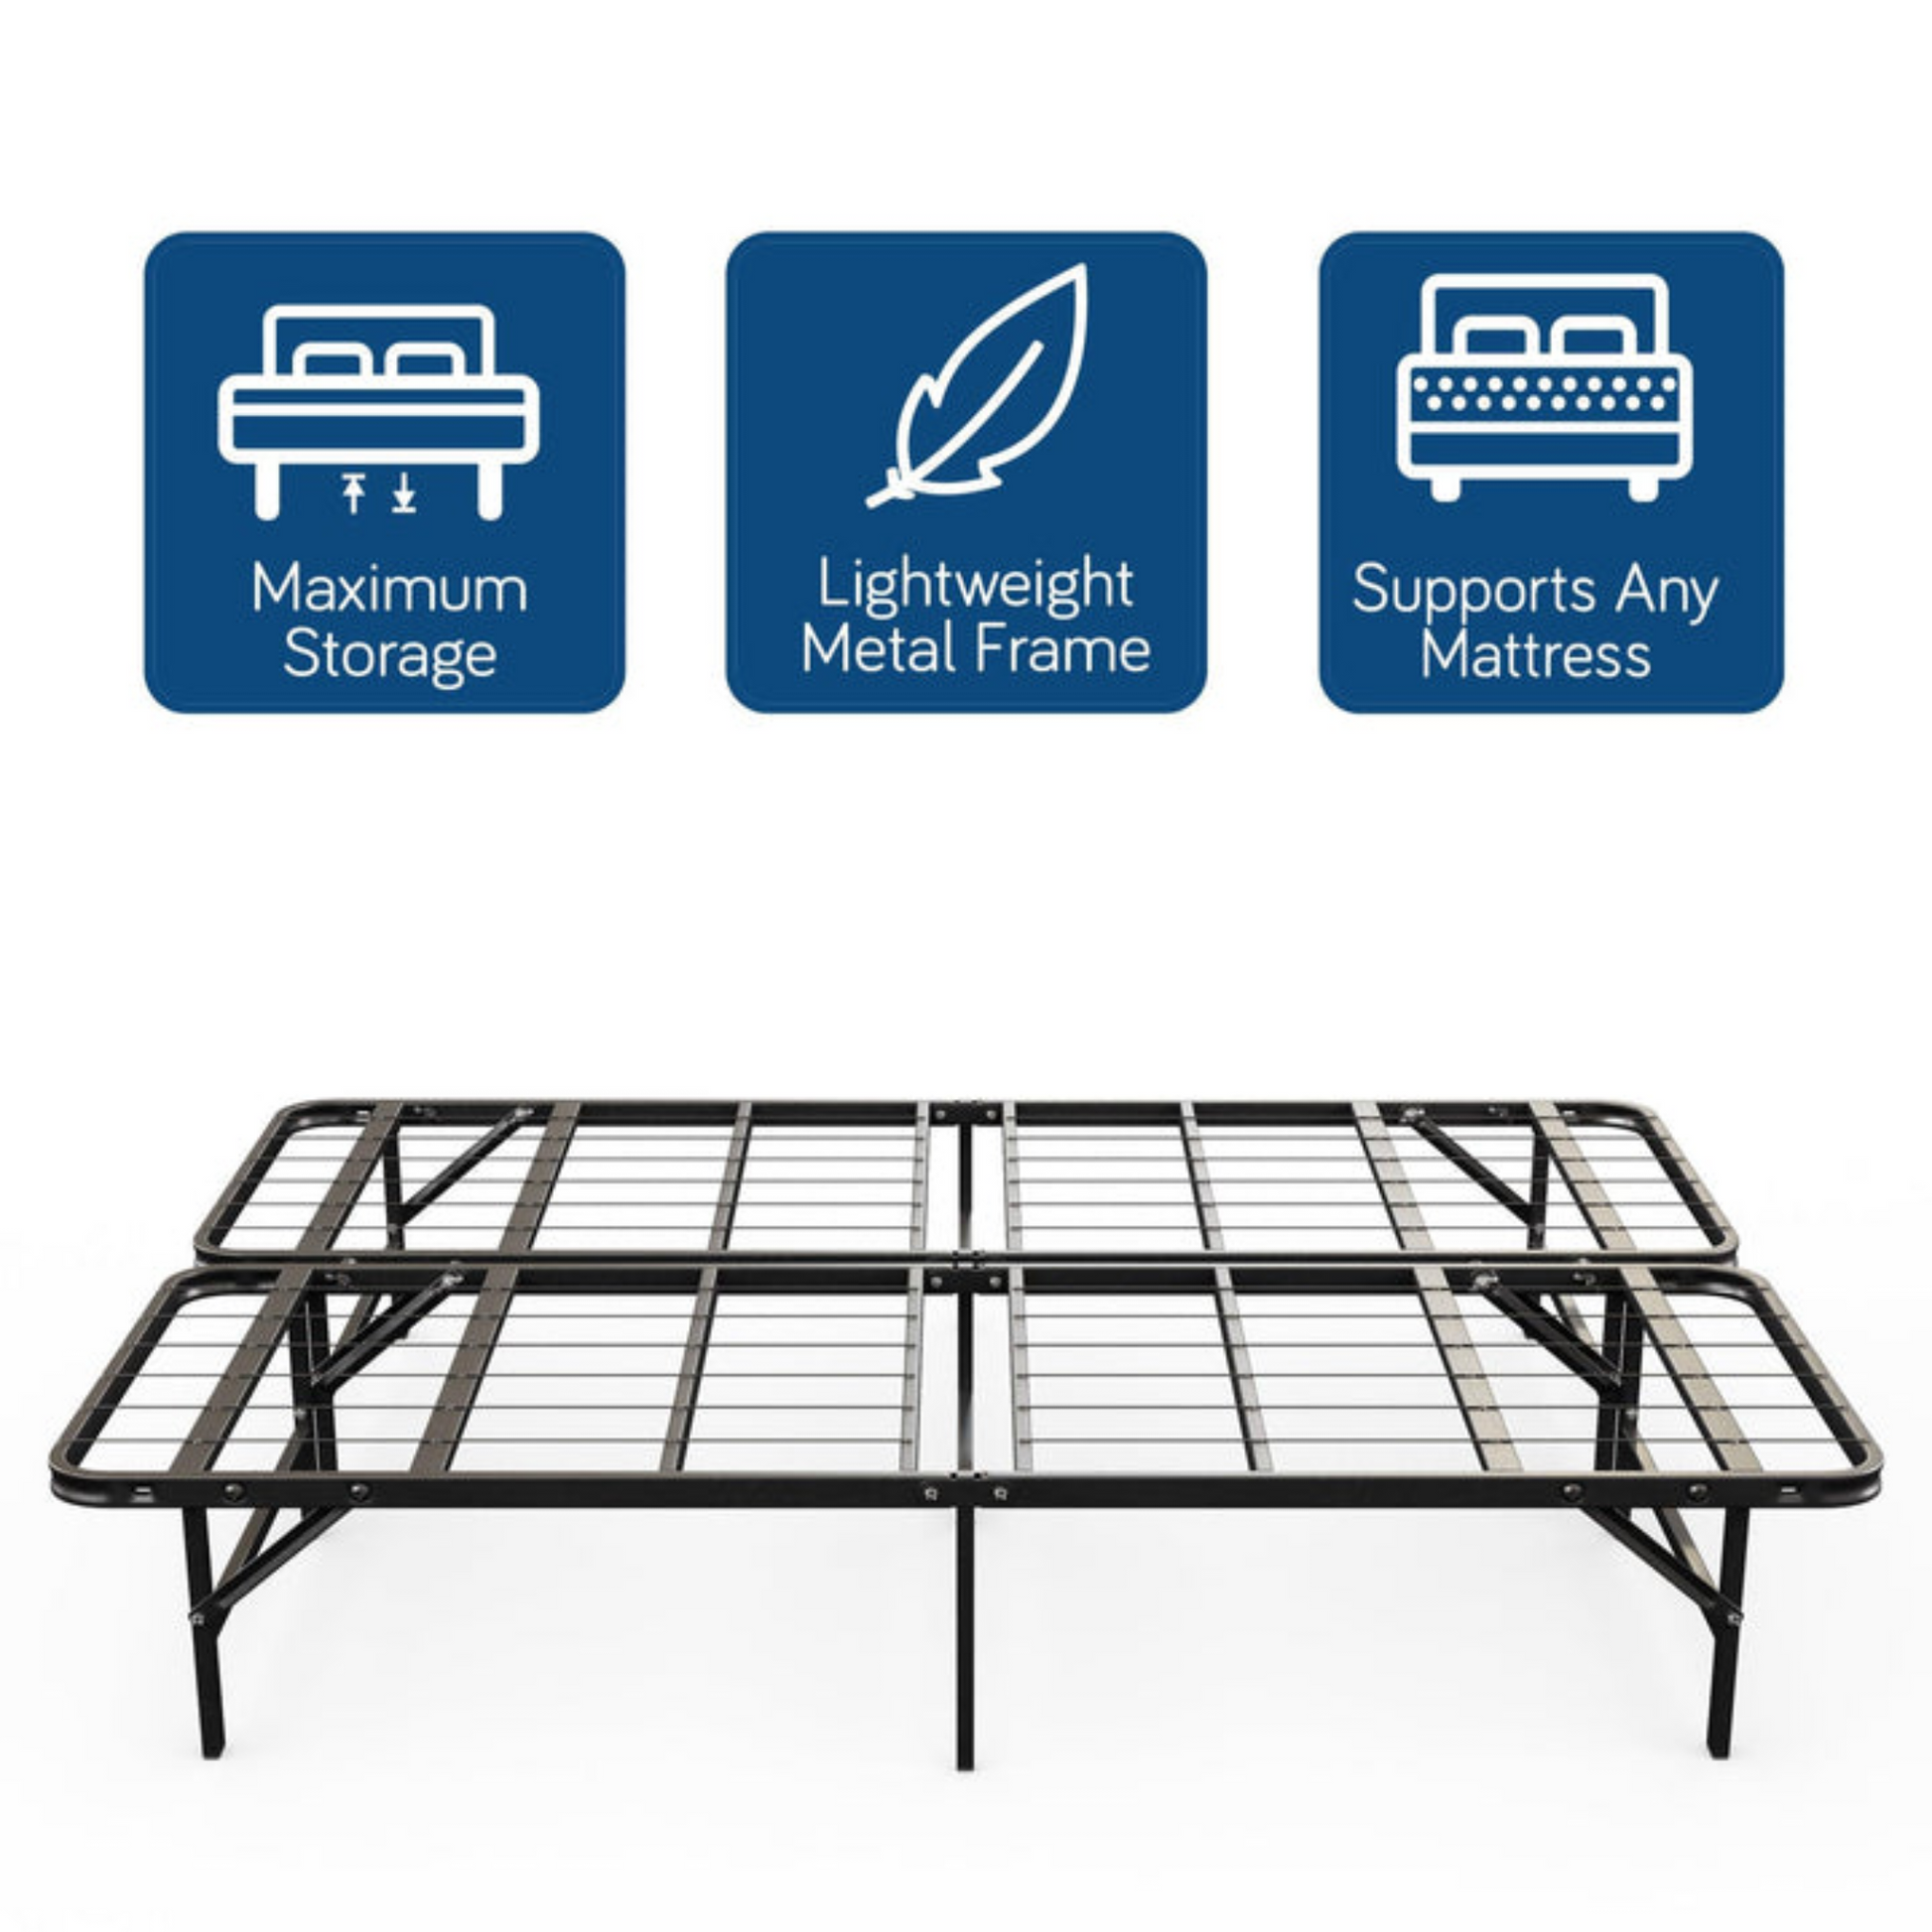 Doms 14" Mattress Foundation With Underneath Storage Space, Side View, With Product Highlights